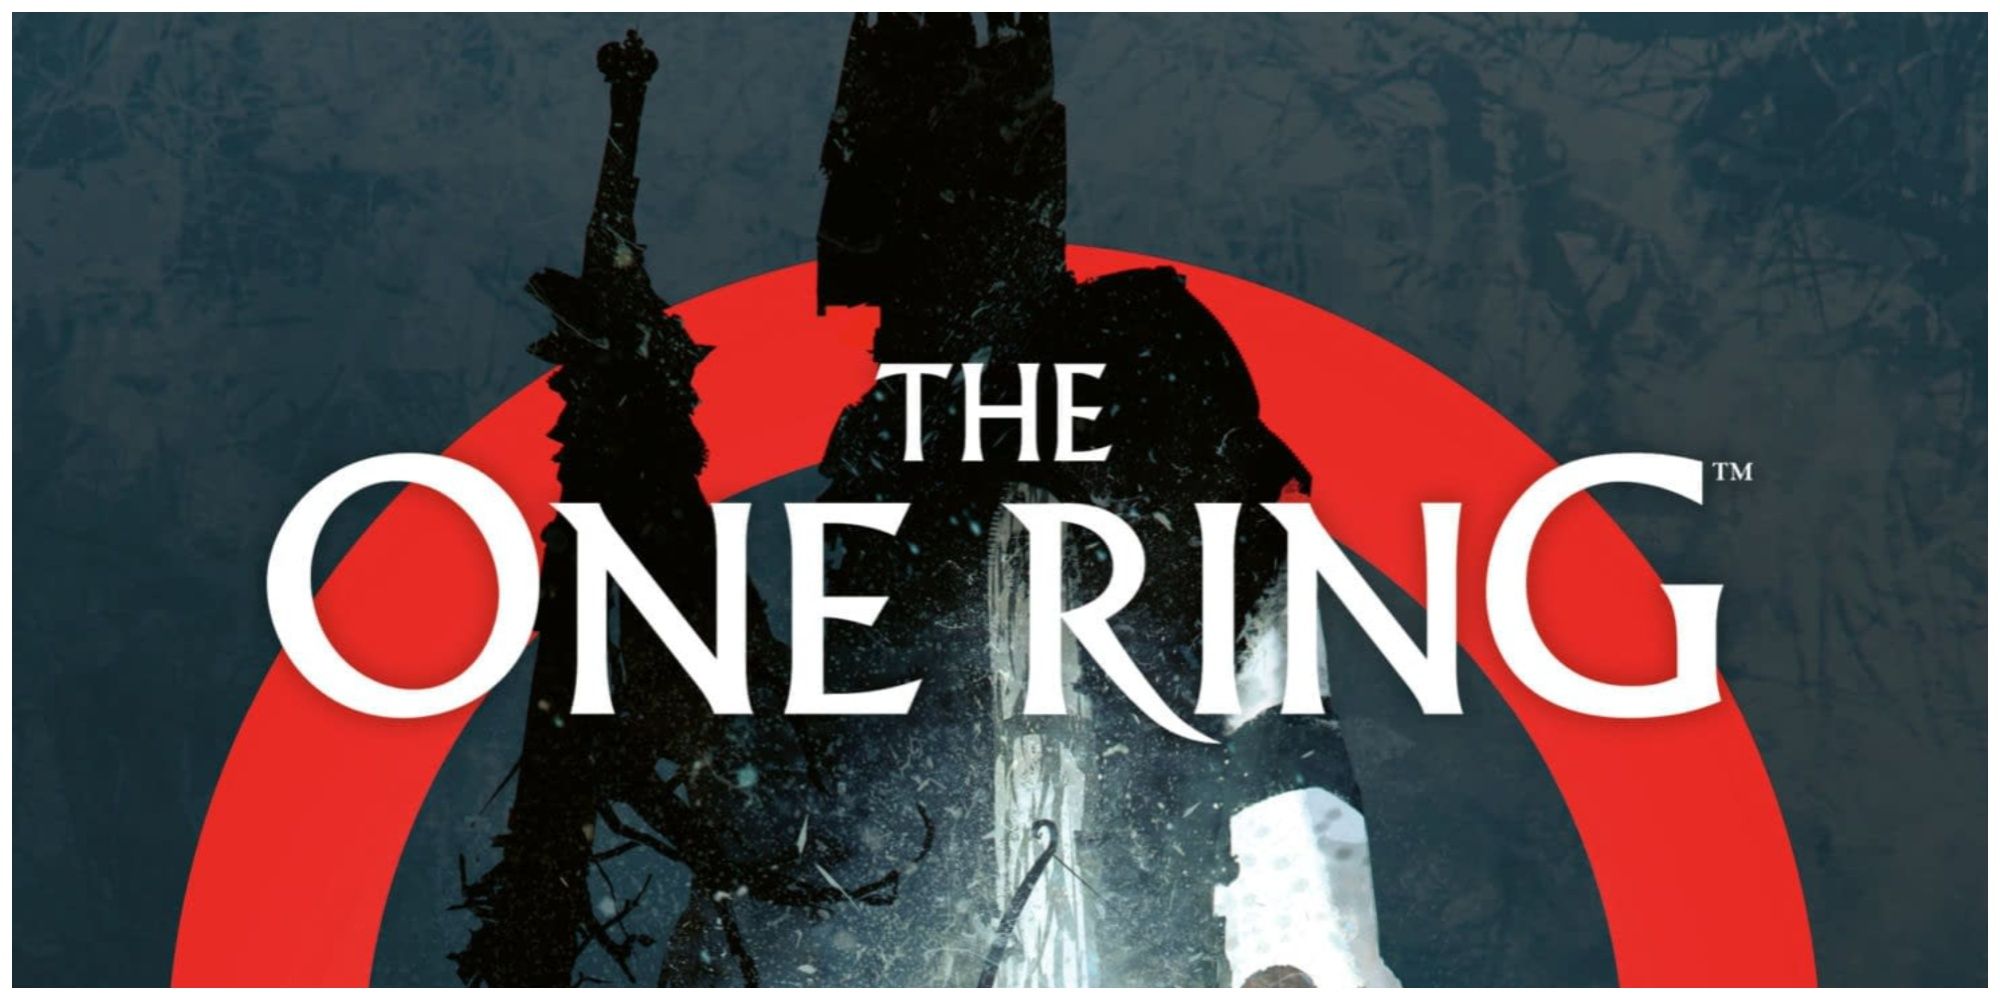 The One Ring RPG cover art